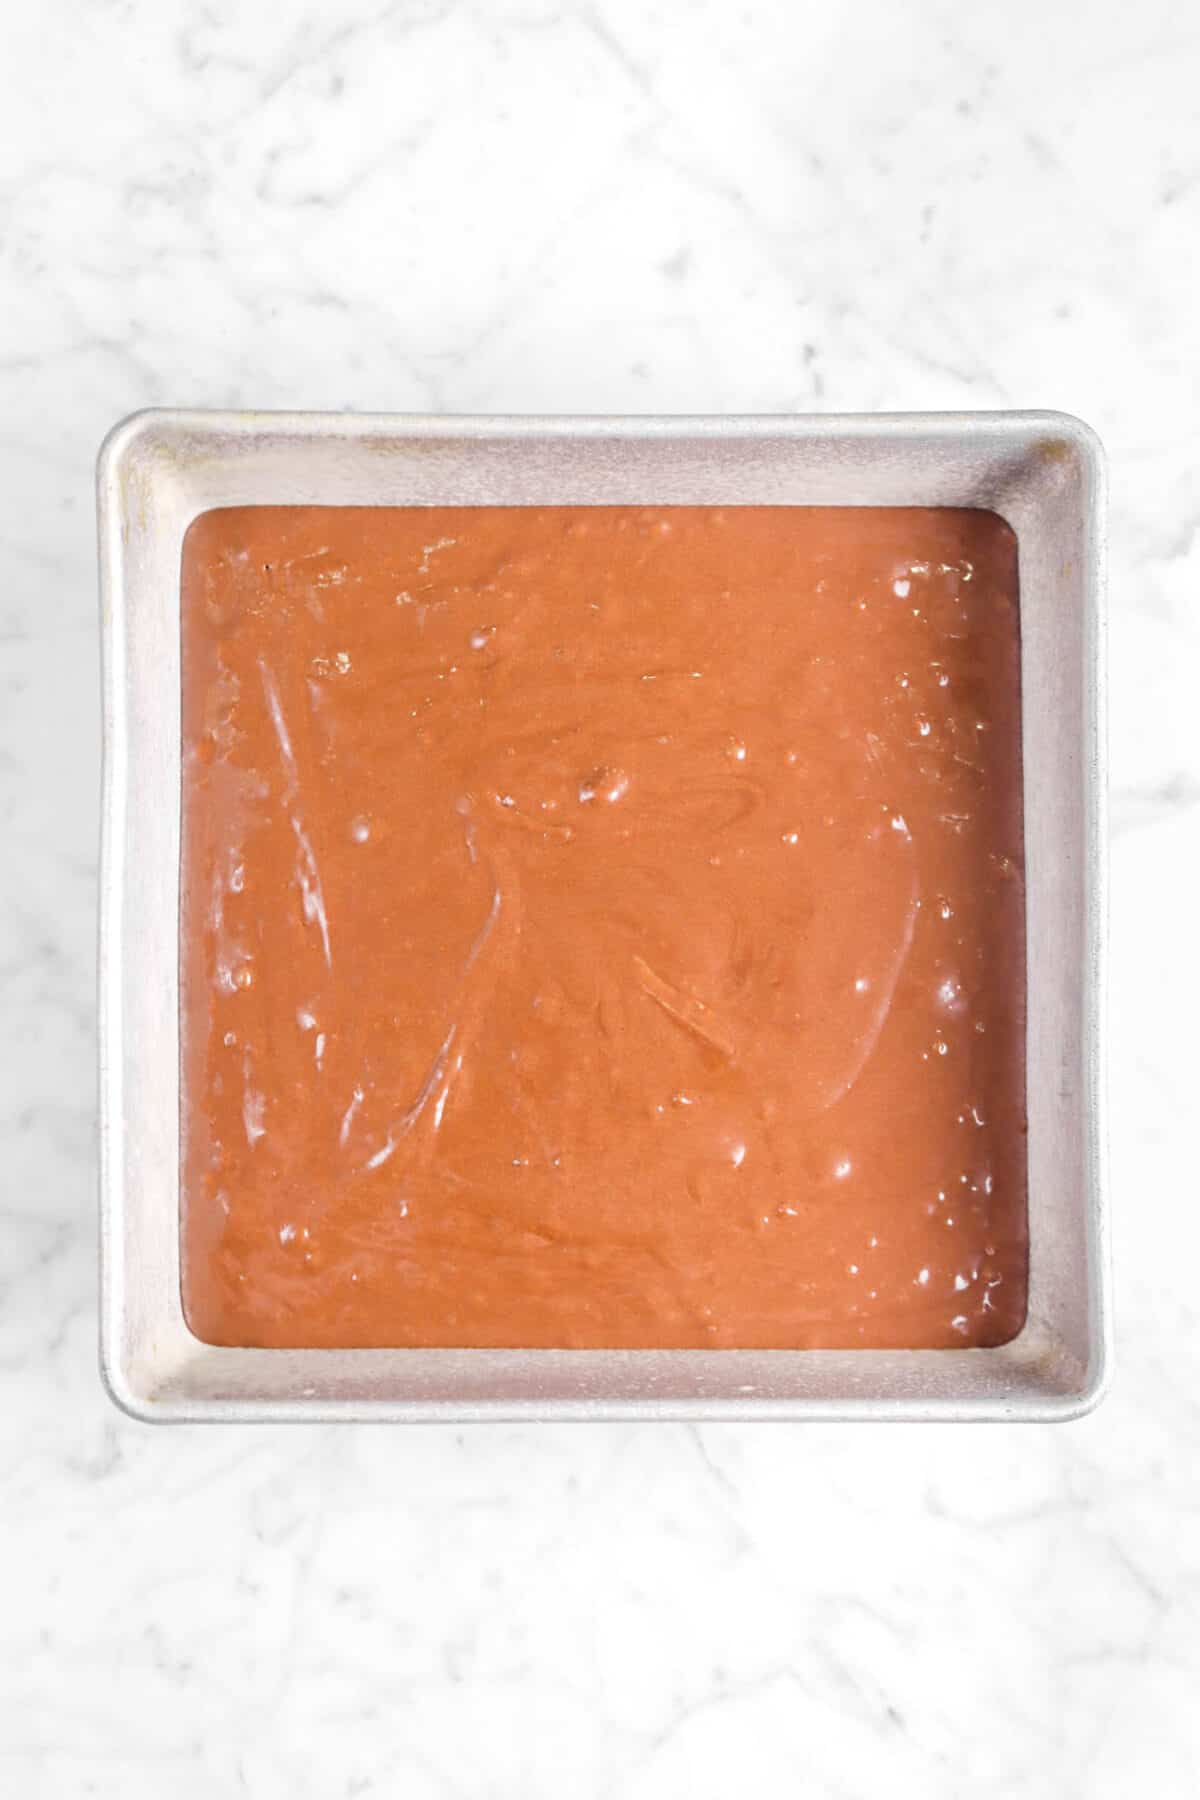 brownie batter in a greased square pan